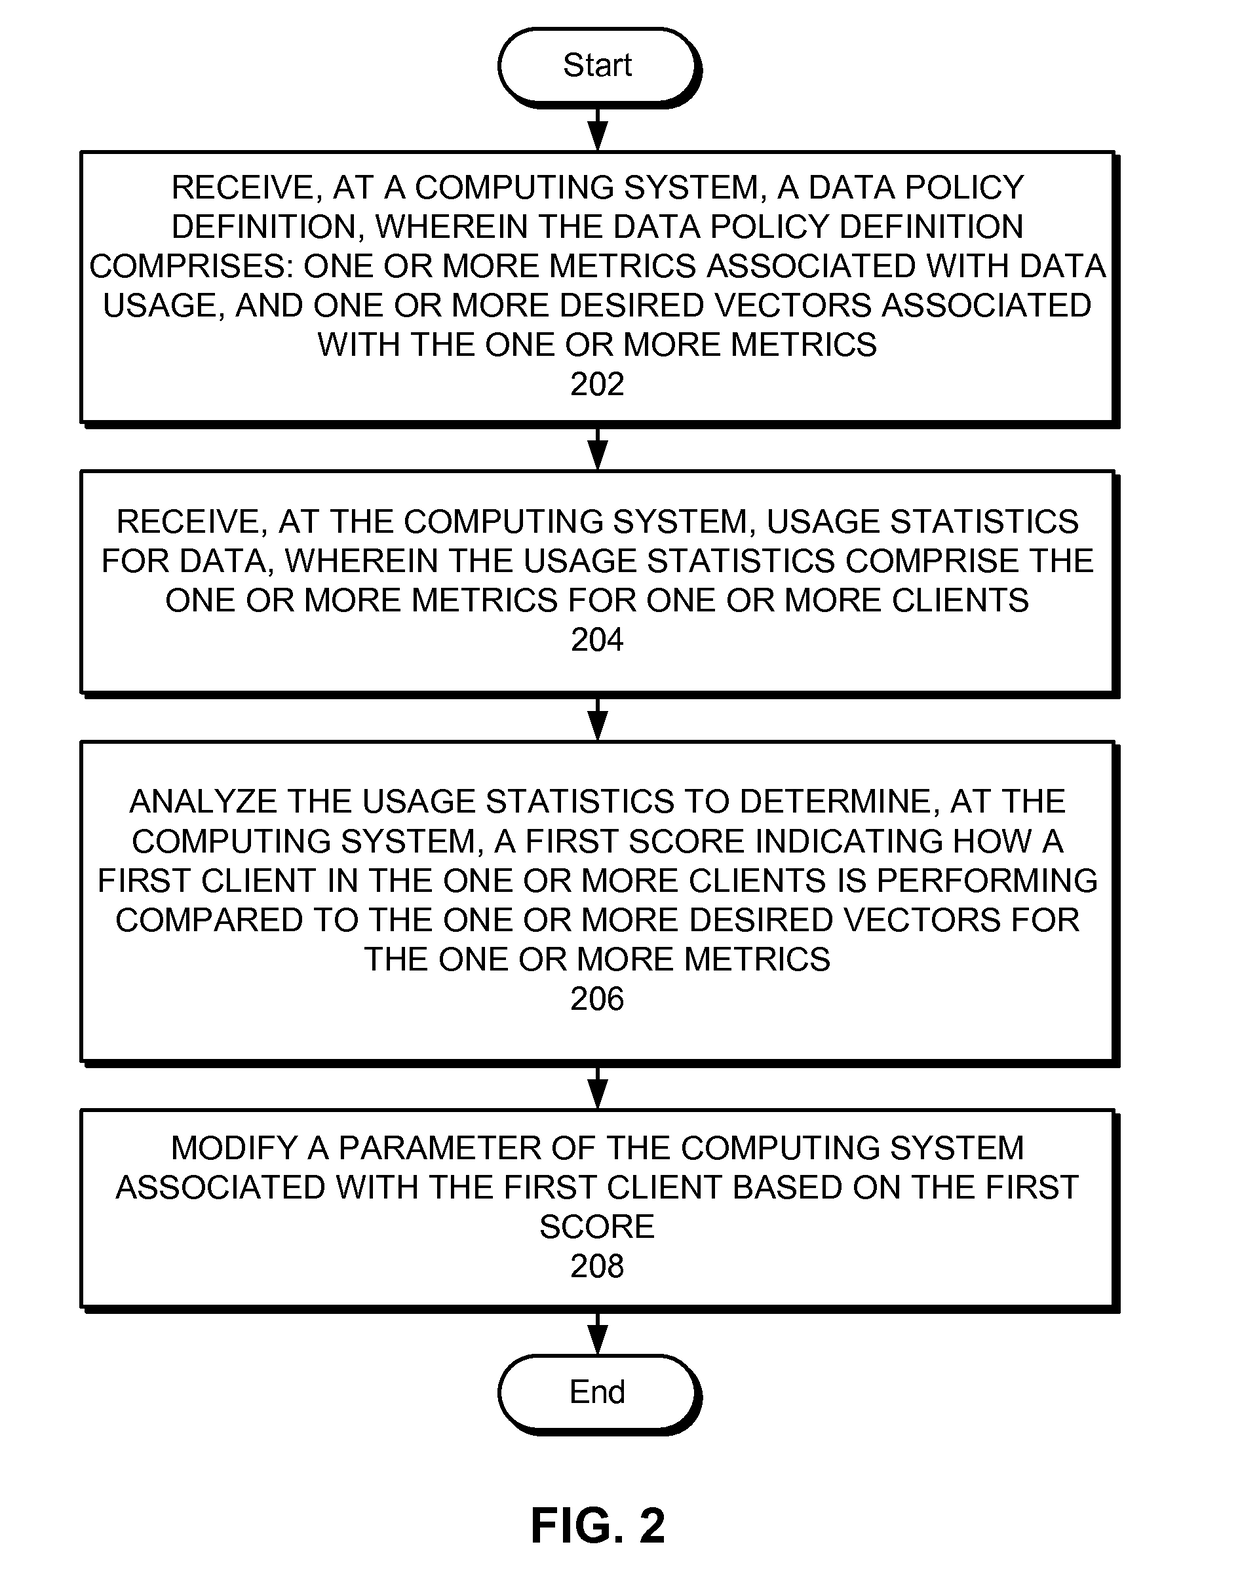 Automatically modifying computer parameters as an incentive for complying with data policies